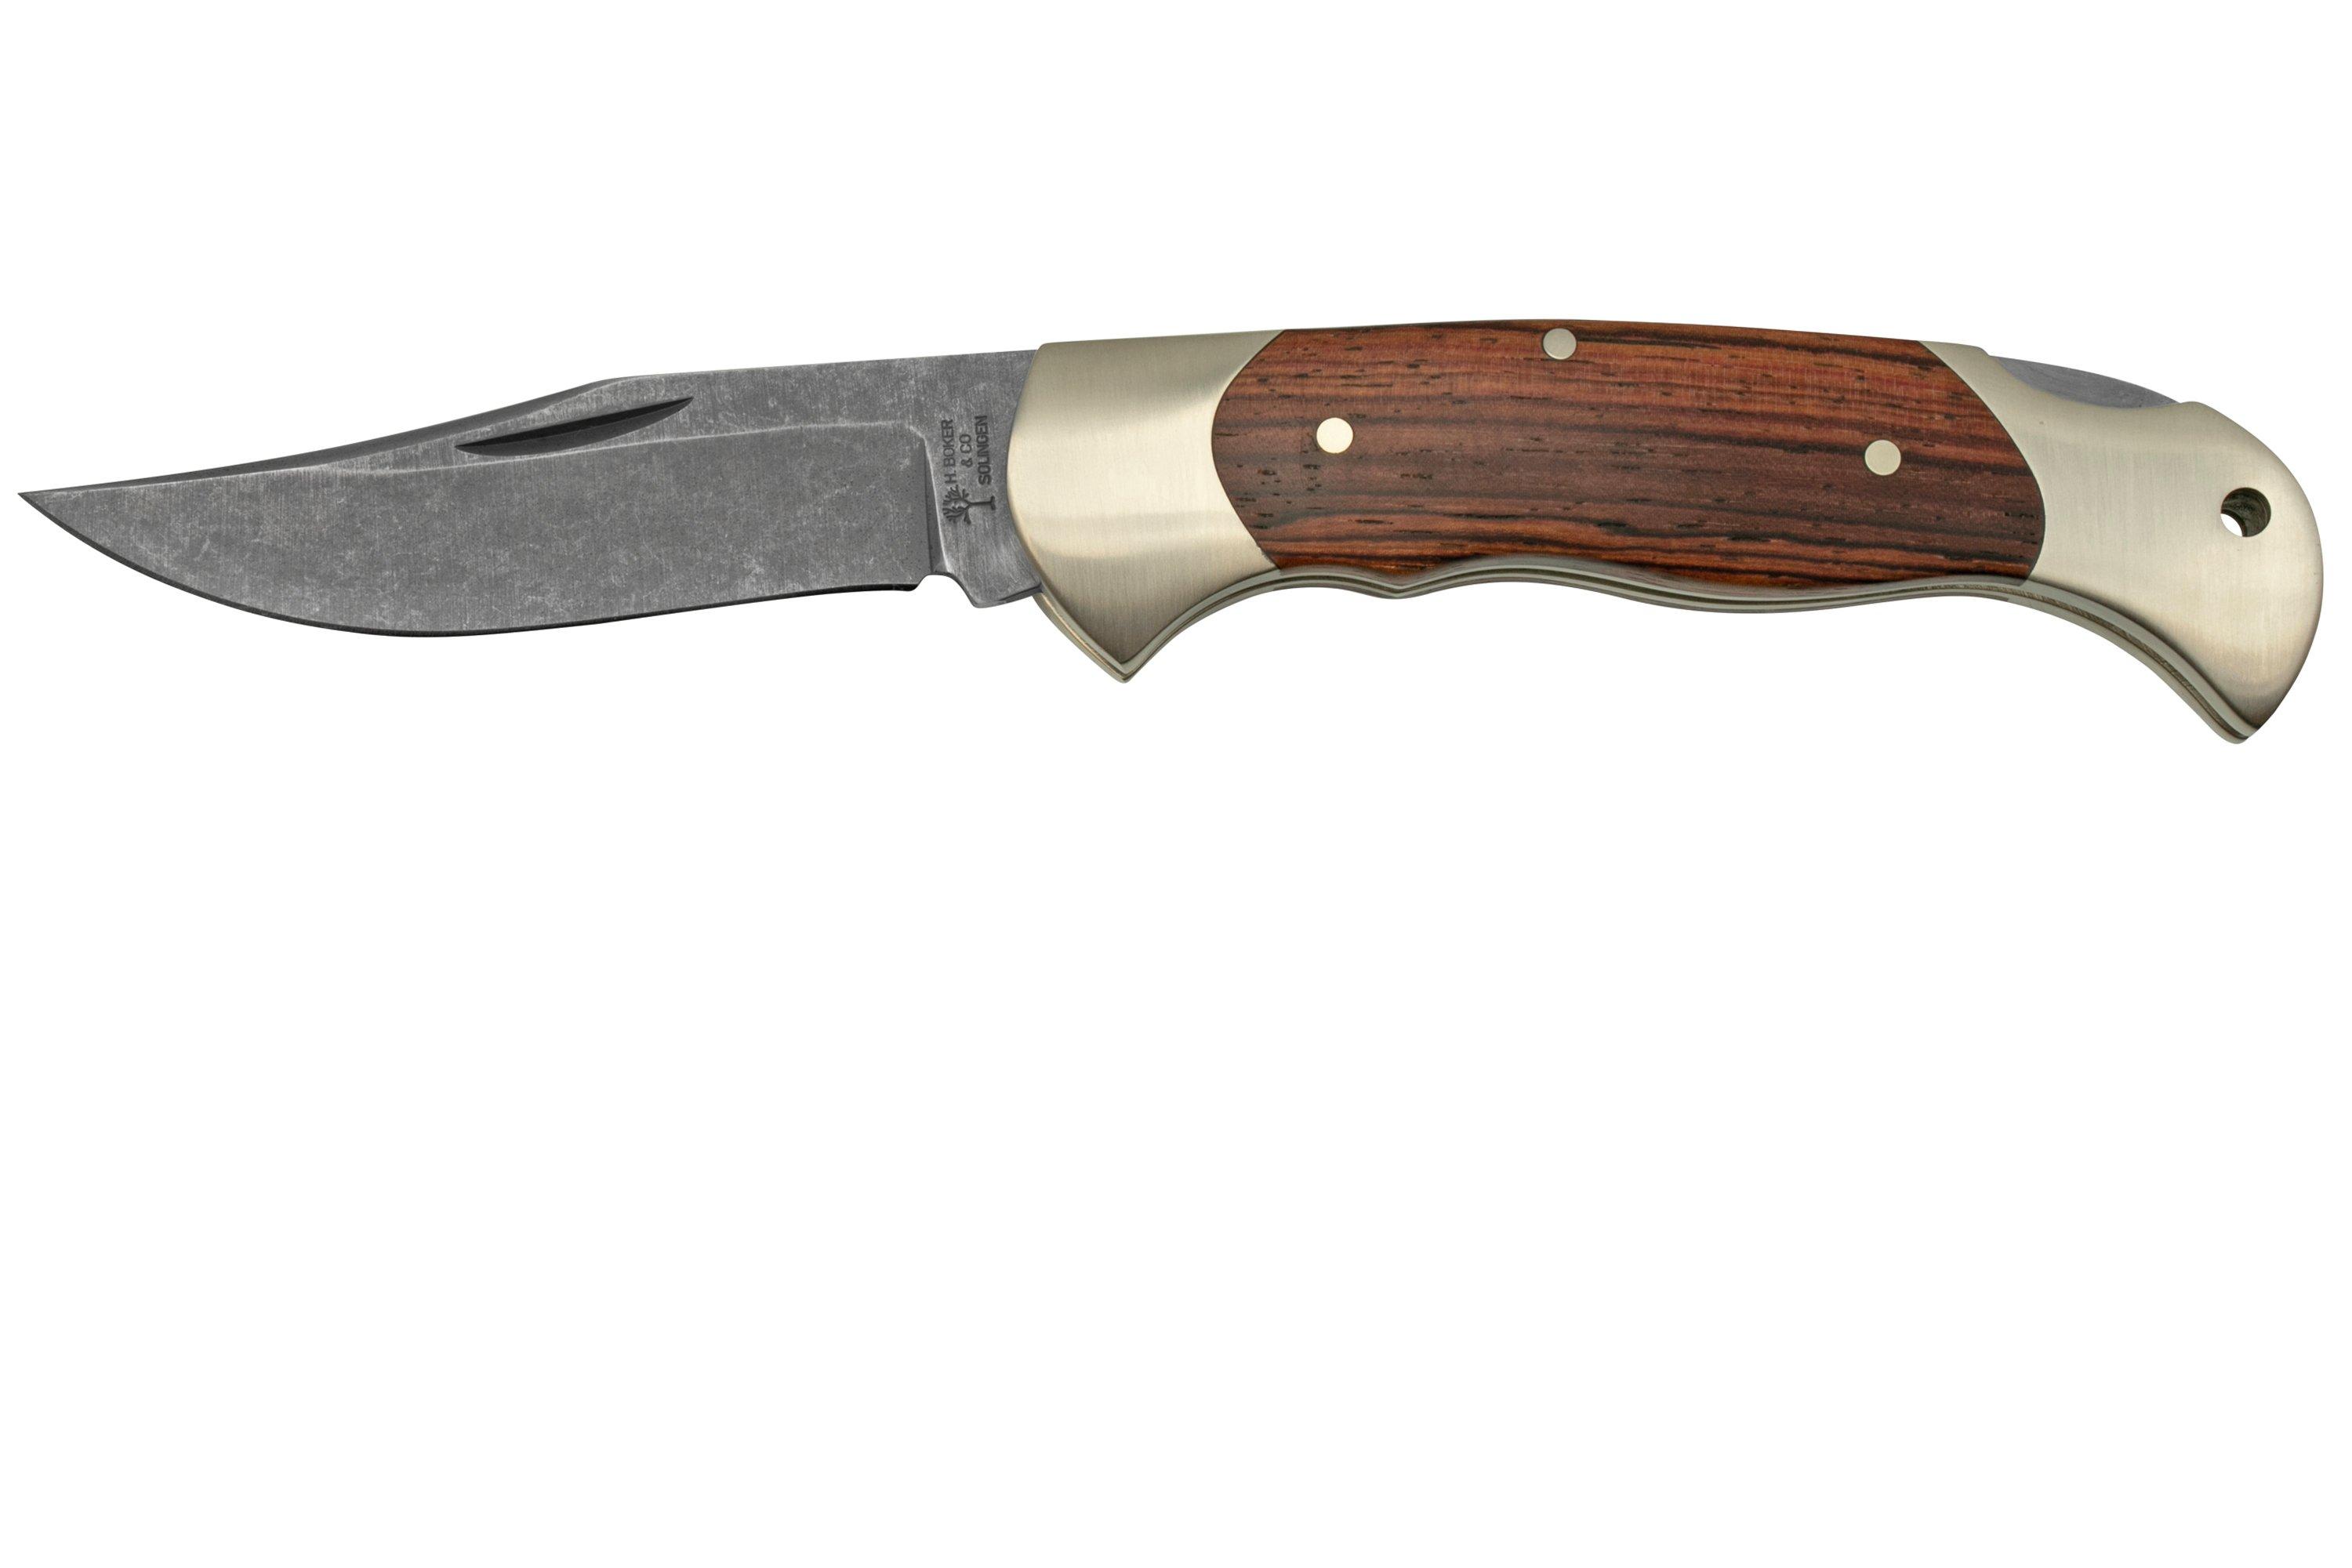 Böker Scout Rosewood 112008 pocket knife  Advantageously shopping at